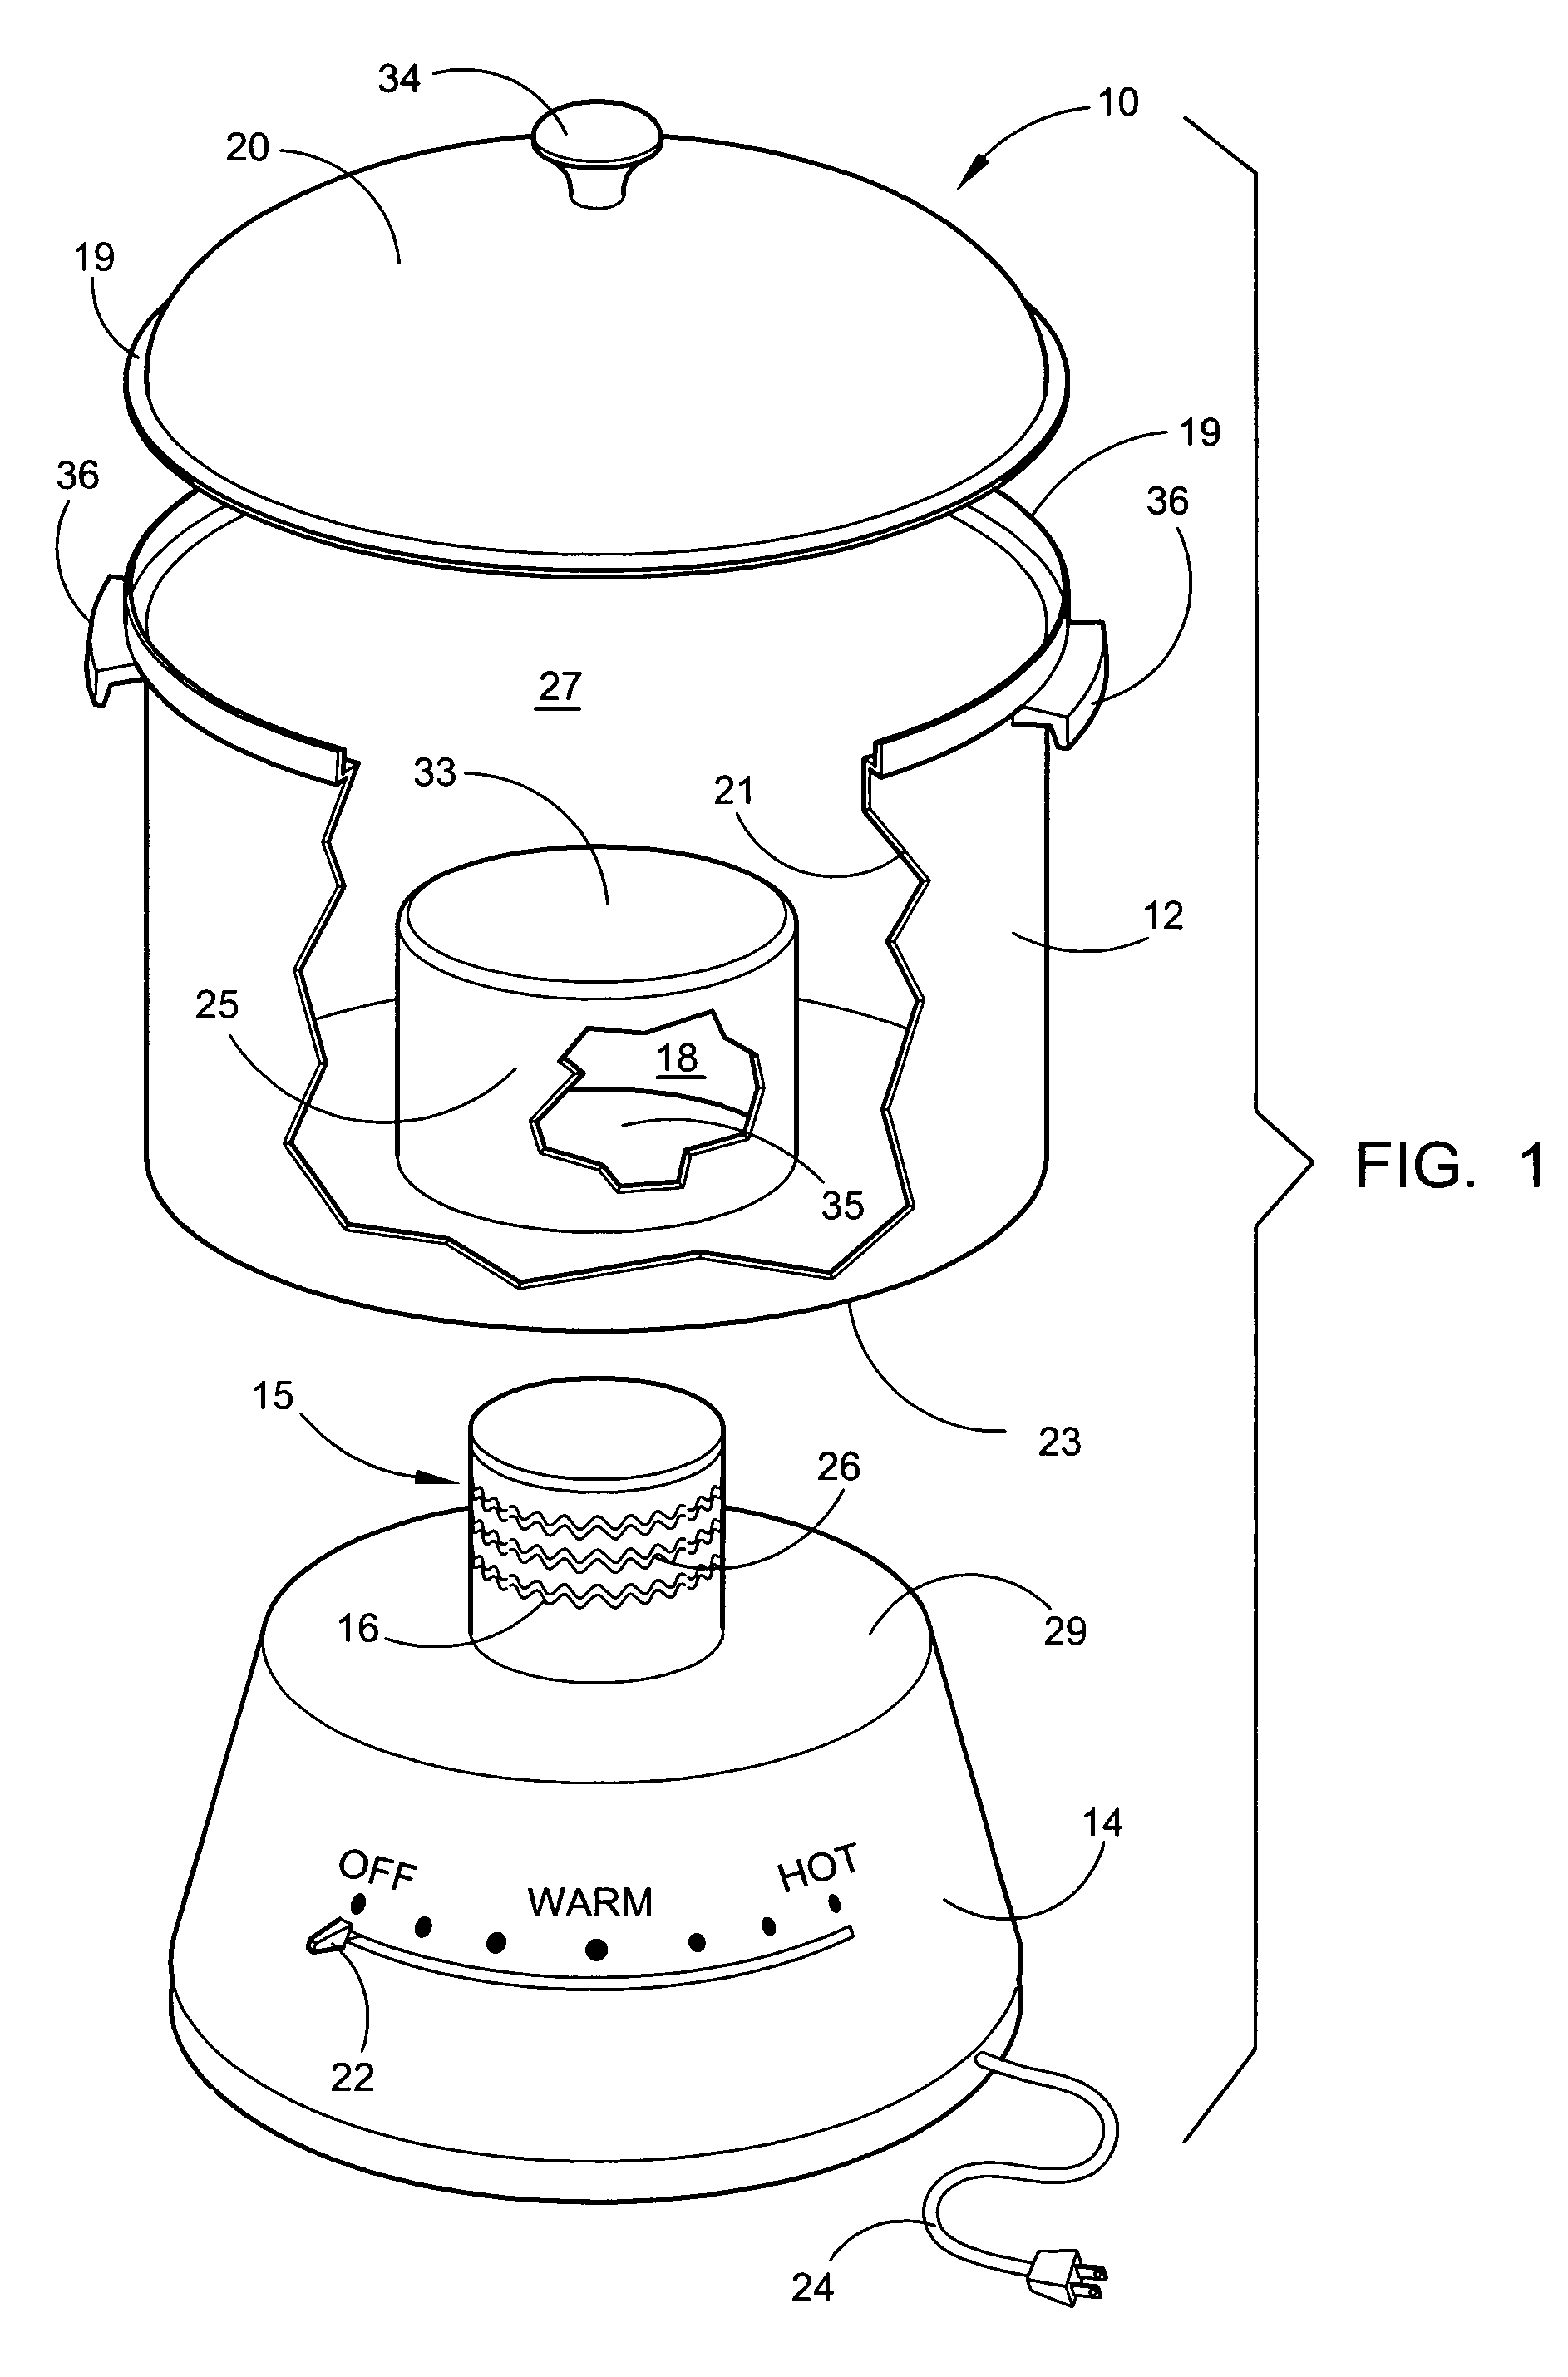 Cooking apparatus employing centrally located heat source